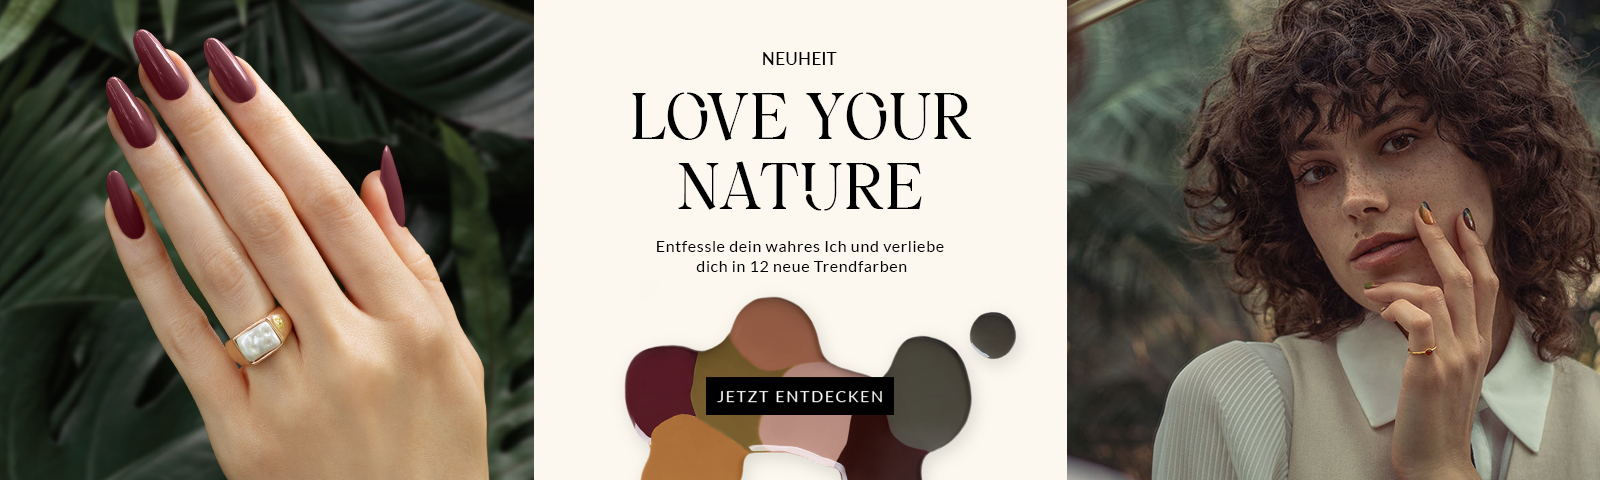 LOVE YOUR NATURE 29.08  